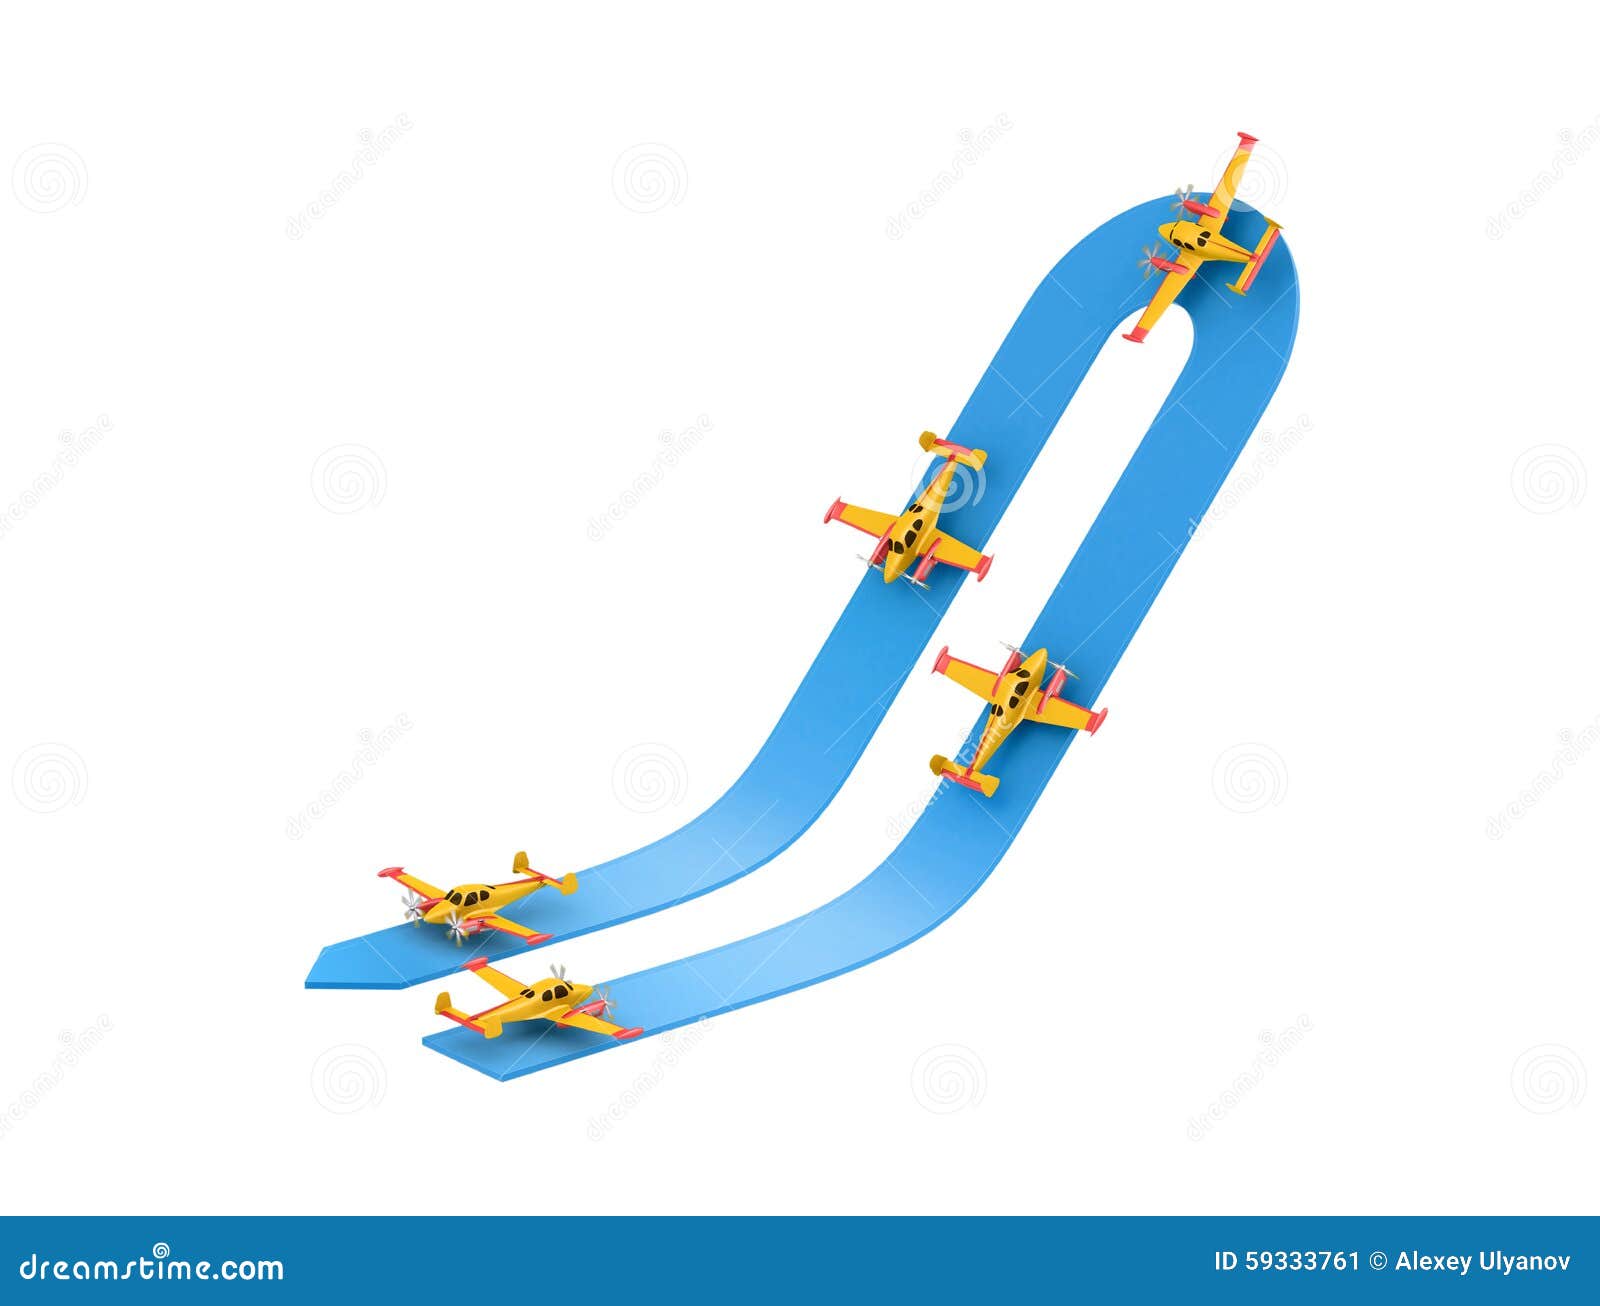  of aerobatics turn on the top with yellow airplane model over blue arrow on white background